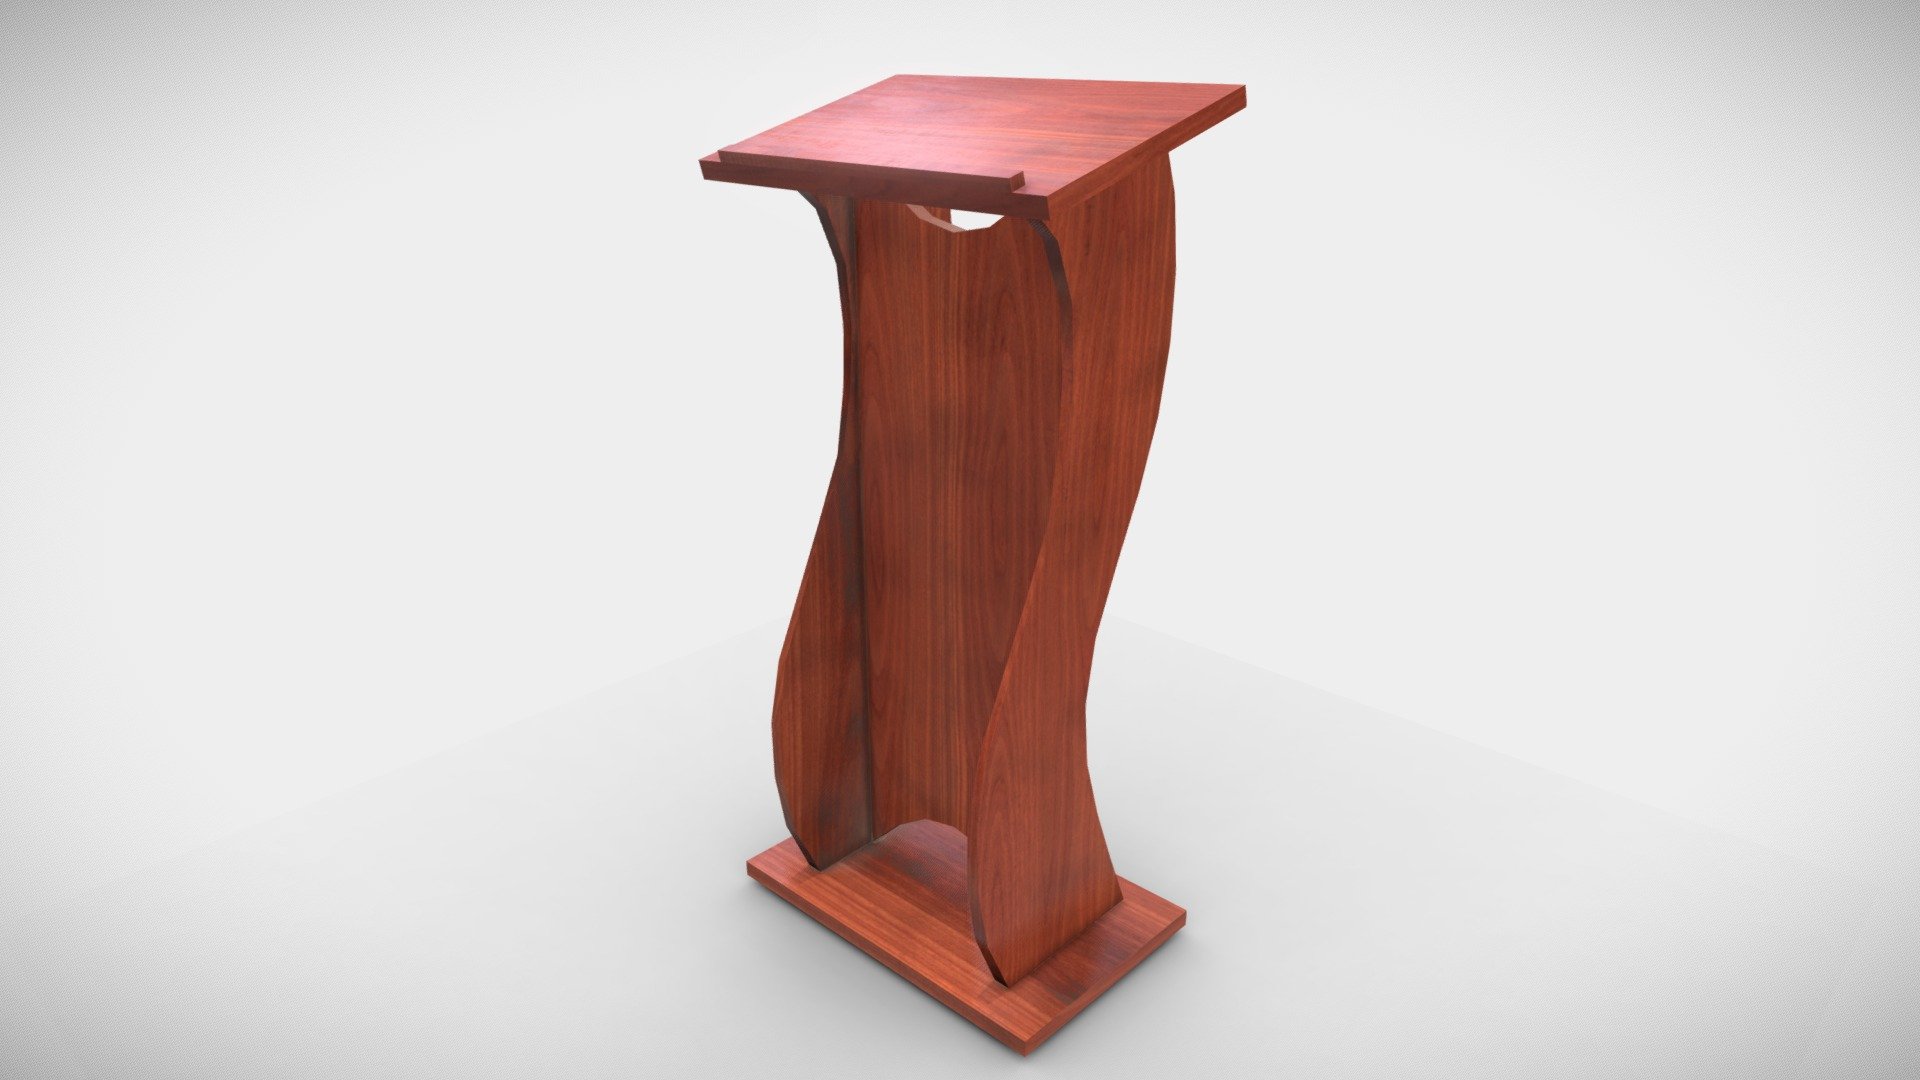 This is a 3D model of a Wooden Curved Pulpit

Made in Blender 2.9x (Cycles Materials) and Rendering Cycles.
Main rendering made in Blender 2.9 + Cycles using some HDR Environment Textures Images for lighting which is NOT provided in the package!

What does this package include?

3D Modeling of a Wooden Curved Pulpit
2K and 4K Textures (Base Color, Normal Map, Roughness, Ambient Occlusion) 

Important notes

File format included - (Blend, FBX, OBJ, MTL)
Texture size -  2K and 4K 
Uvs non - overlapping
Polygon: Quads
Centered at 0,0,0
In some formats may be needed to reassign textures and add HDR Environment Textures Images for lighting.
Not lights include 
Renders preview have not post processing
No special plugin needed to open the scene.

If you like my work, please leave your comment and like, it helps me a lot to create new content.

If you have any questions or changes about colors or another thing, you can contact me at  we3domodel@gmail.com - Wooden Curved Pulpit - Buy Royalty Free 3D model by We3Do (@giovanny) 3d model